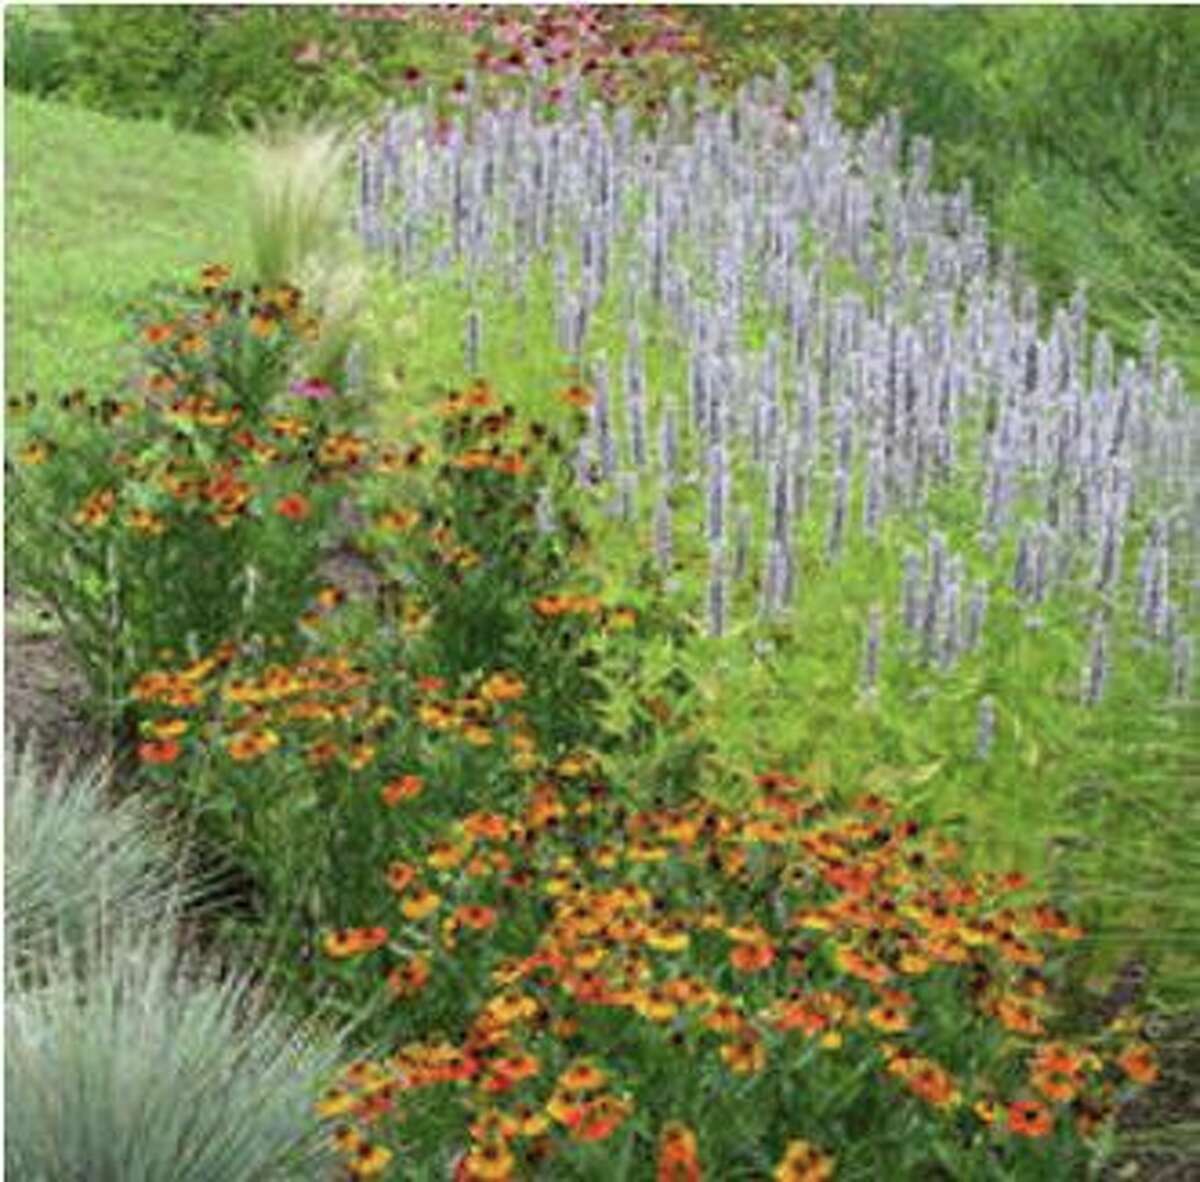 The plantings along the Pollinator Pathway are beautiful as well as useful.